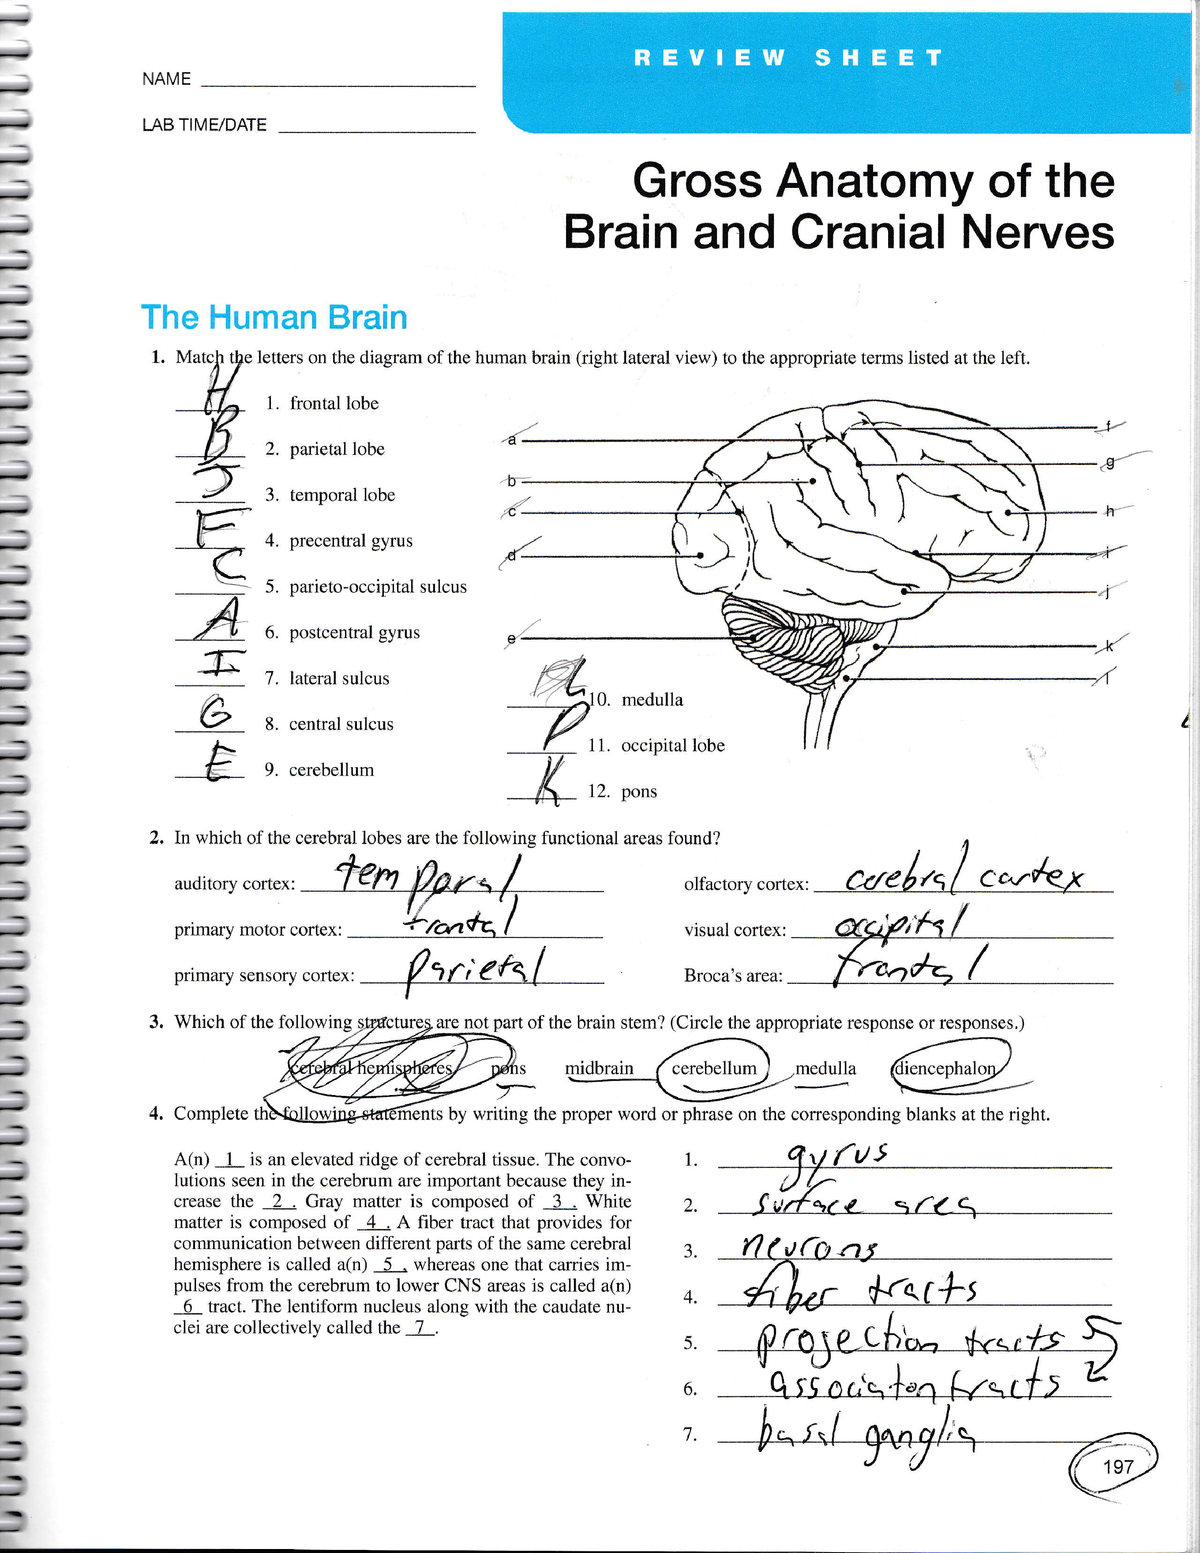 gross-anatomy-of-the-brain-and-cranial-nerves-worksheet-answers-anatomy-worksheets